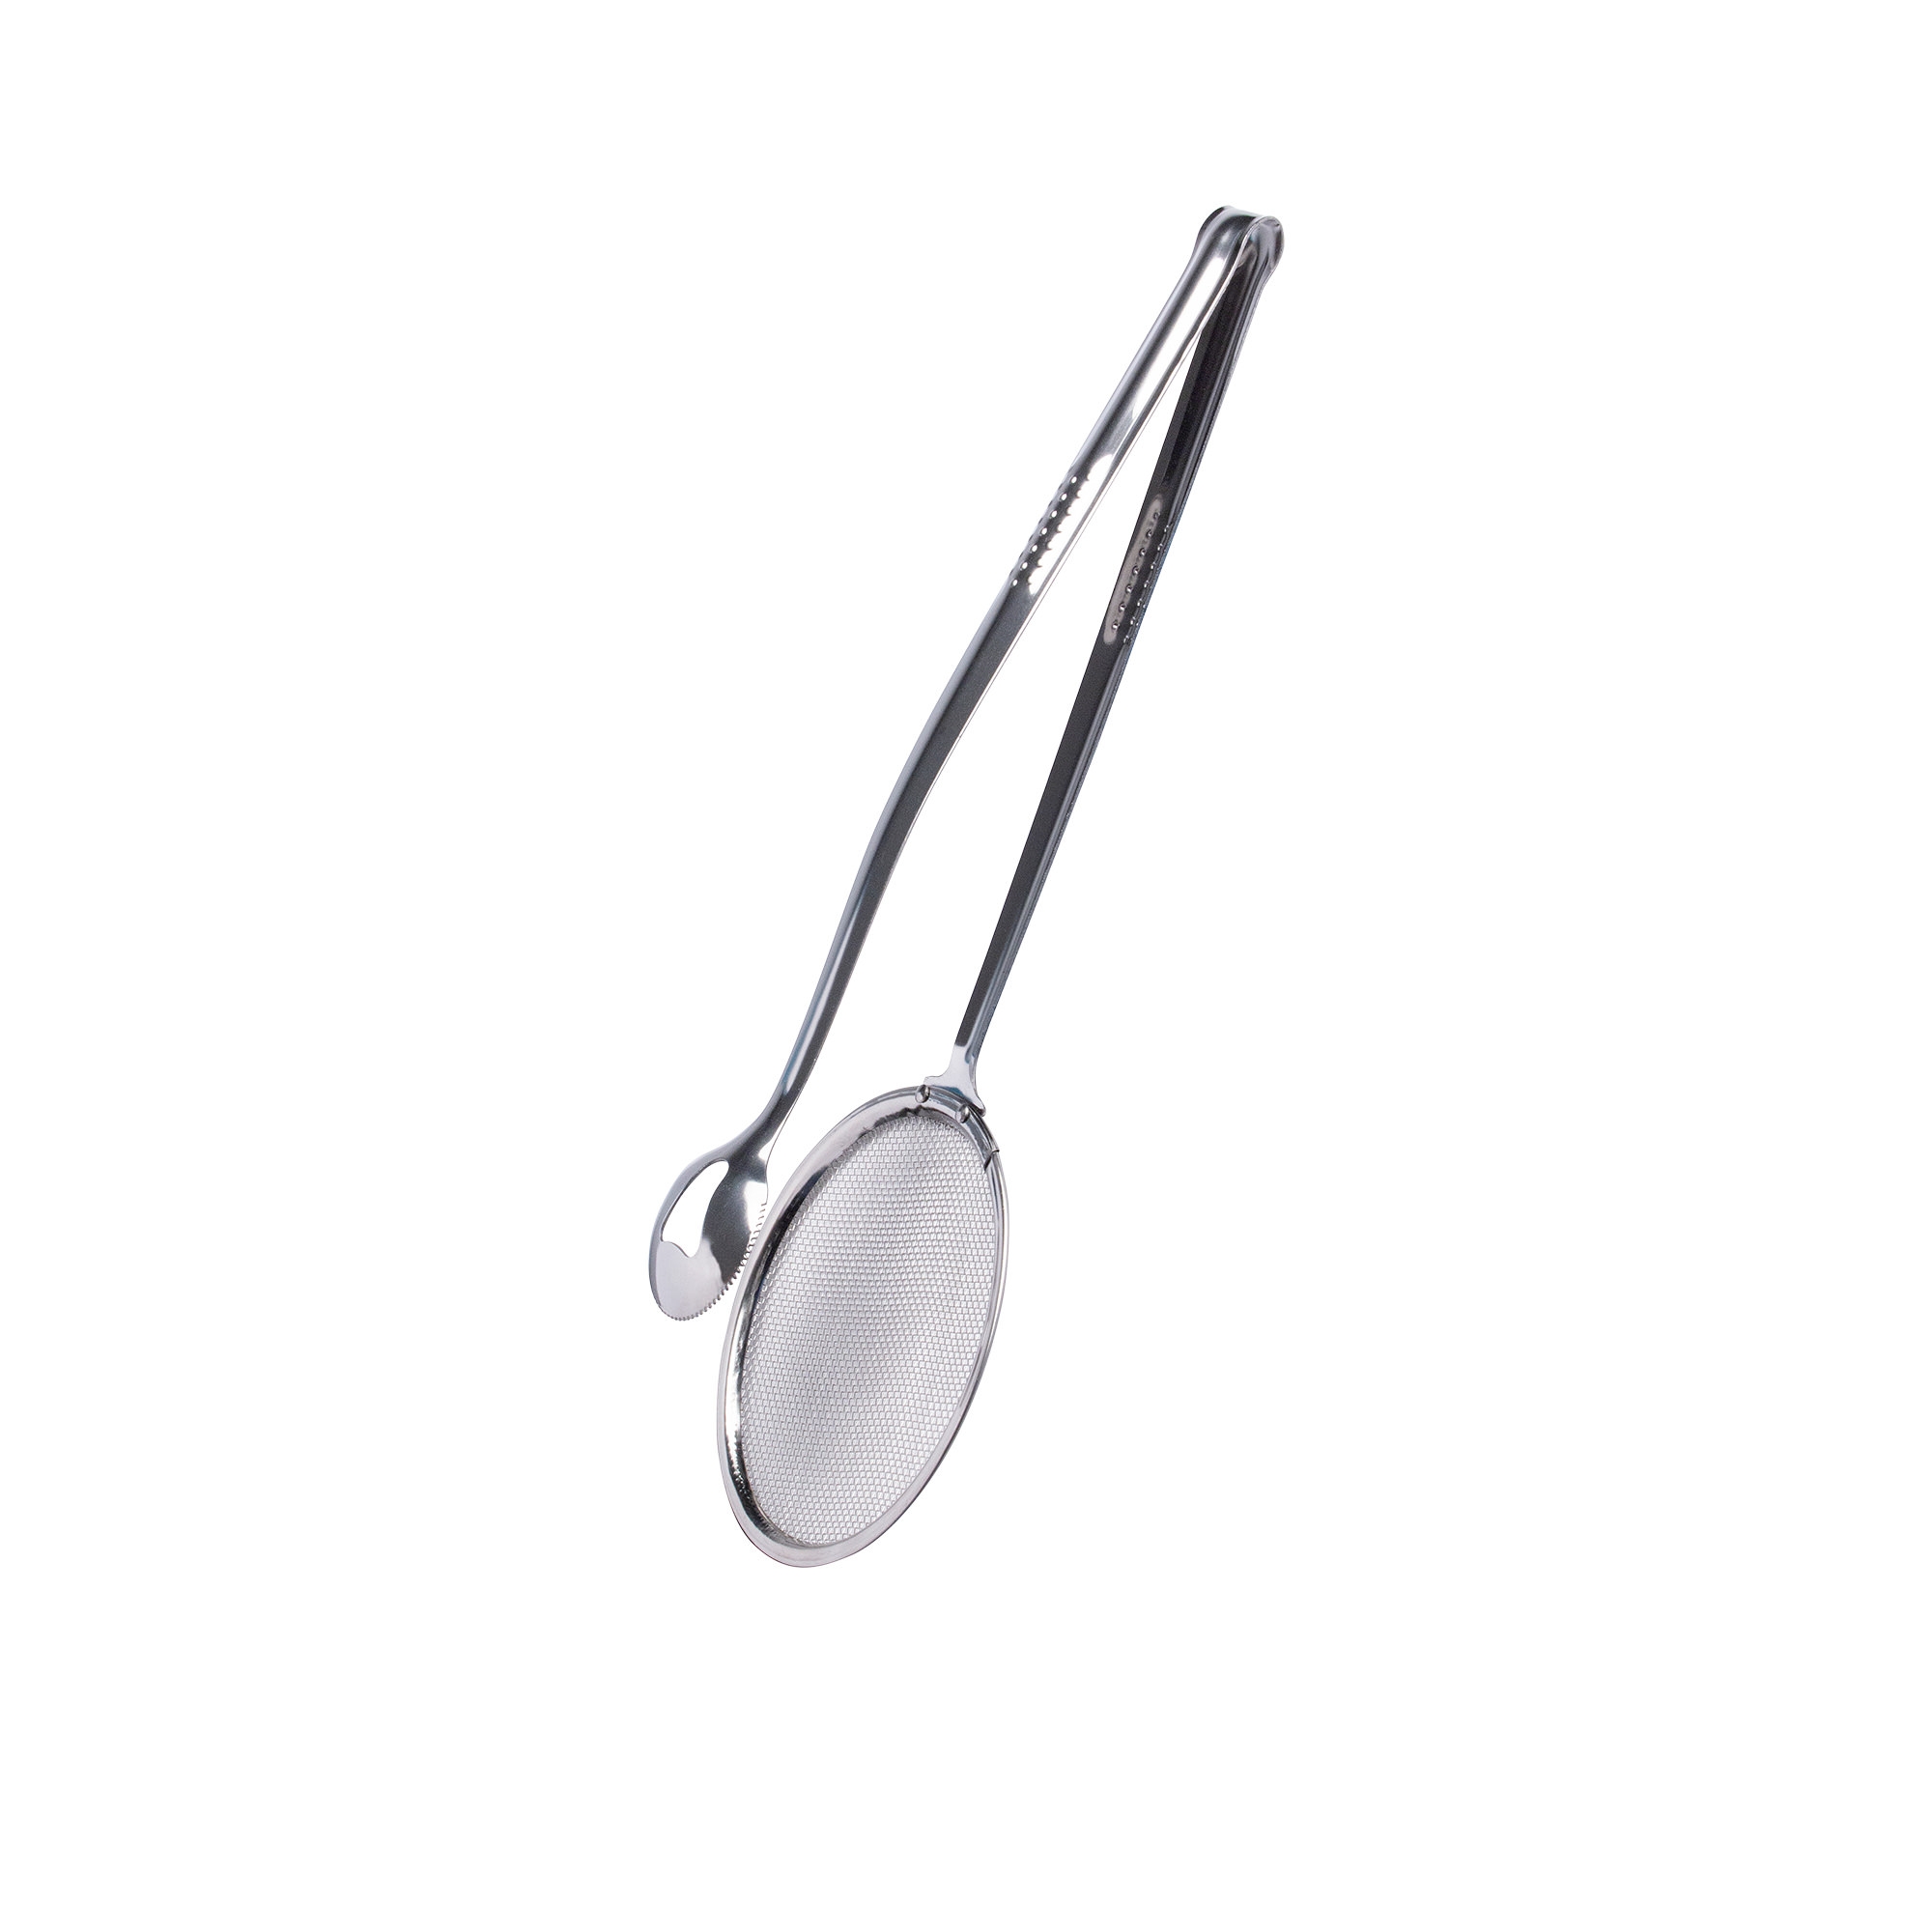 Cuisena Frying Tongs and Strainer 28cm Stainless Steel Image 1